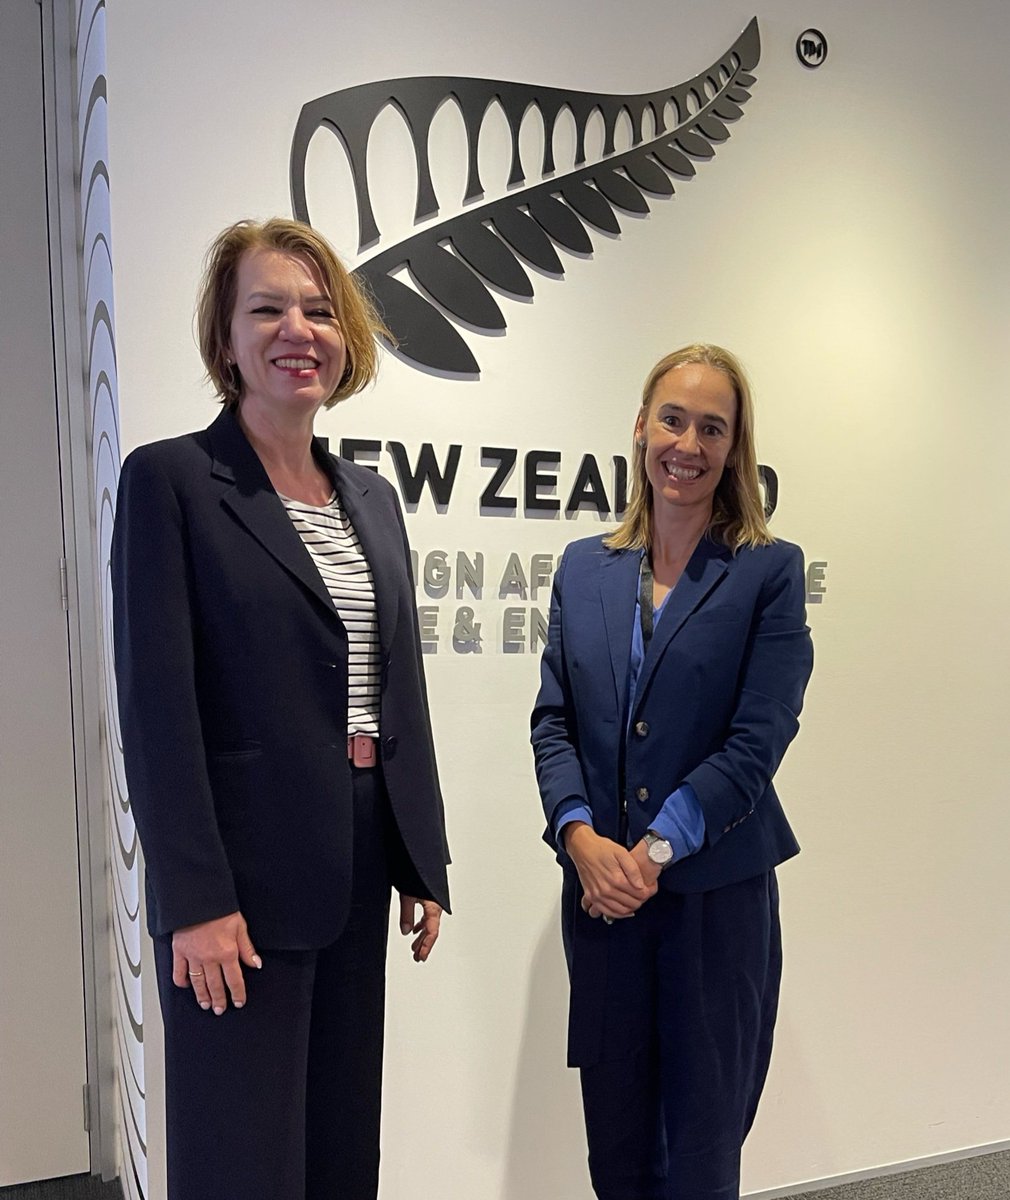 Thanks to Rachel Maidment and @MFATinAuckland @MFATNZ for the warm welcome and the great exchange on bilateral affairs and upcoming visits. @GermanAmbWell